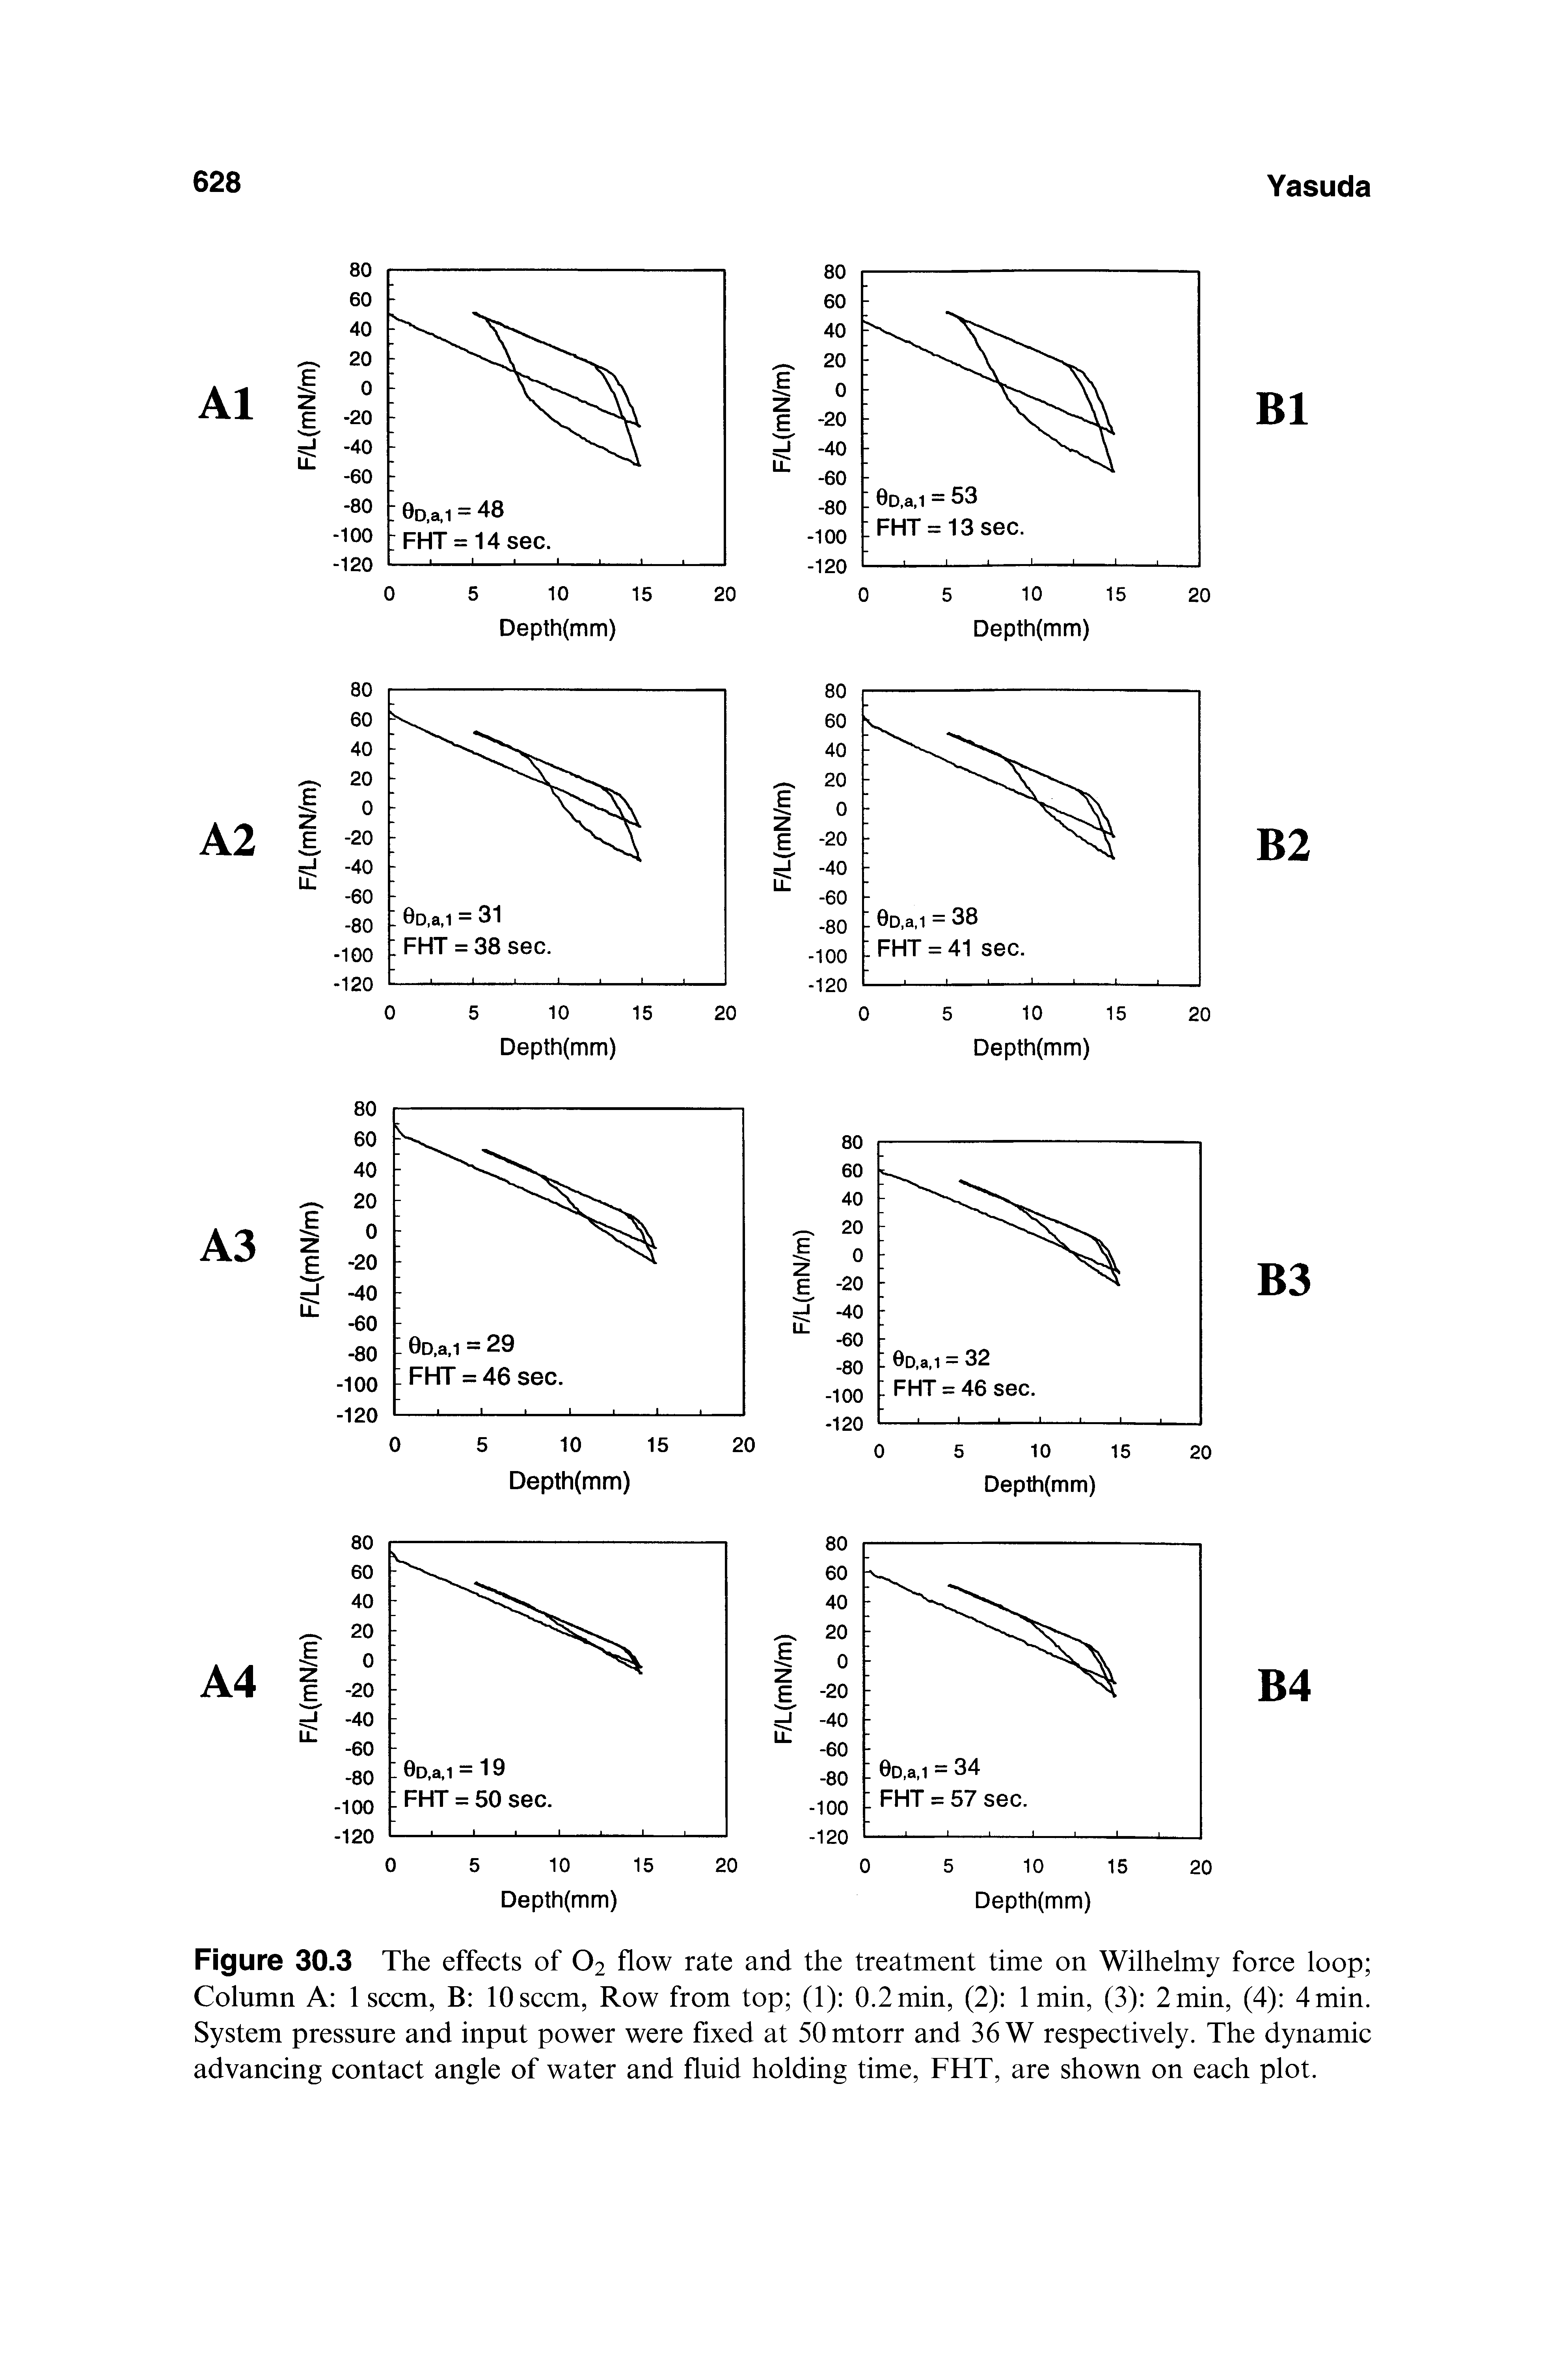 Figure 30.3 The effects of O2 flow rate and the treatment time on Wilhelmy force loop Column A 1 seem, B 10 seem, Row from top (1) 0.2 min, (2) 1 min, (3) 2 min, (4) 4 min. System pressure and input power were fixed at SOmtorr and 36 W respectively. The dynamic advancing contact angle of water and fluid holding time, FHT, are shown on each plot.